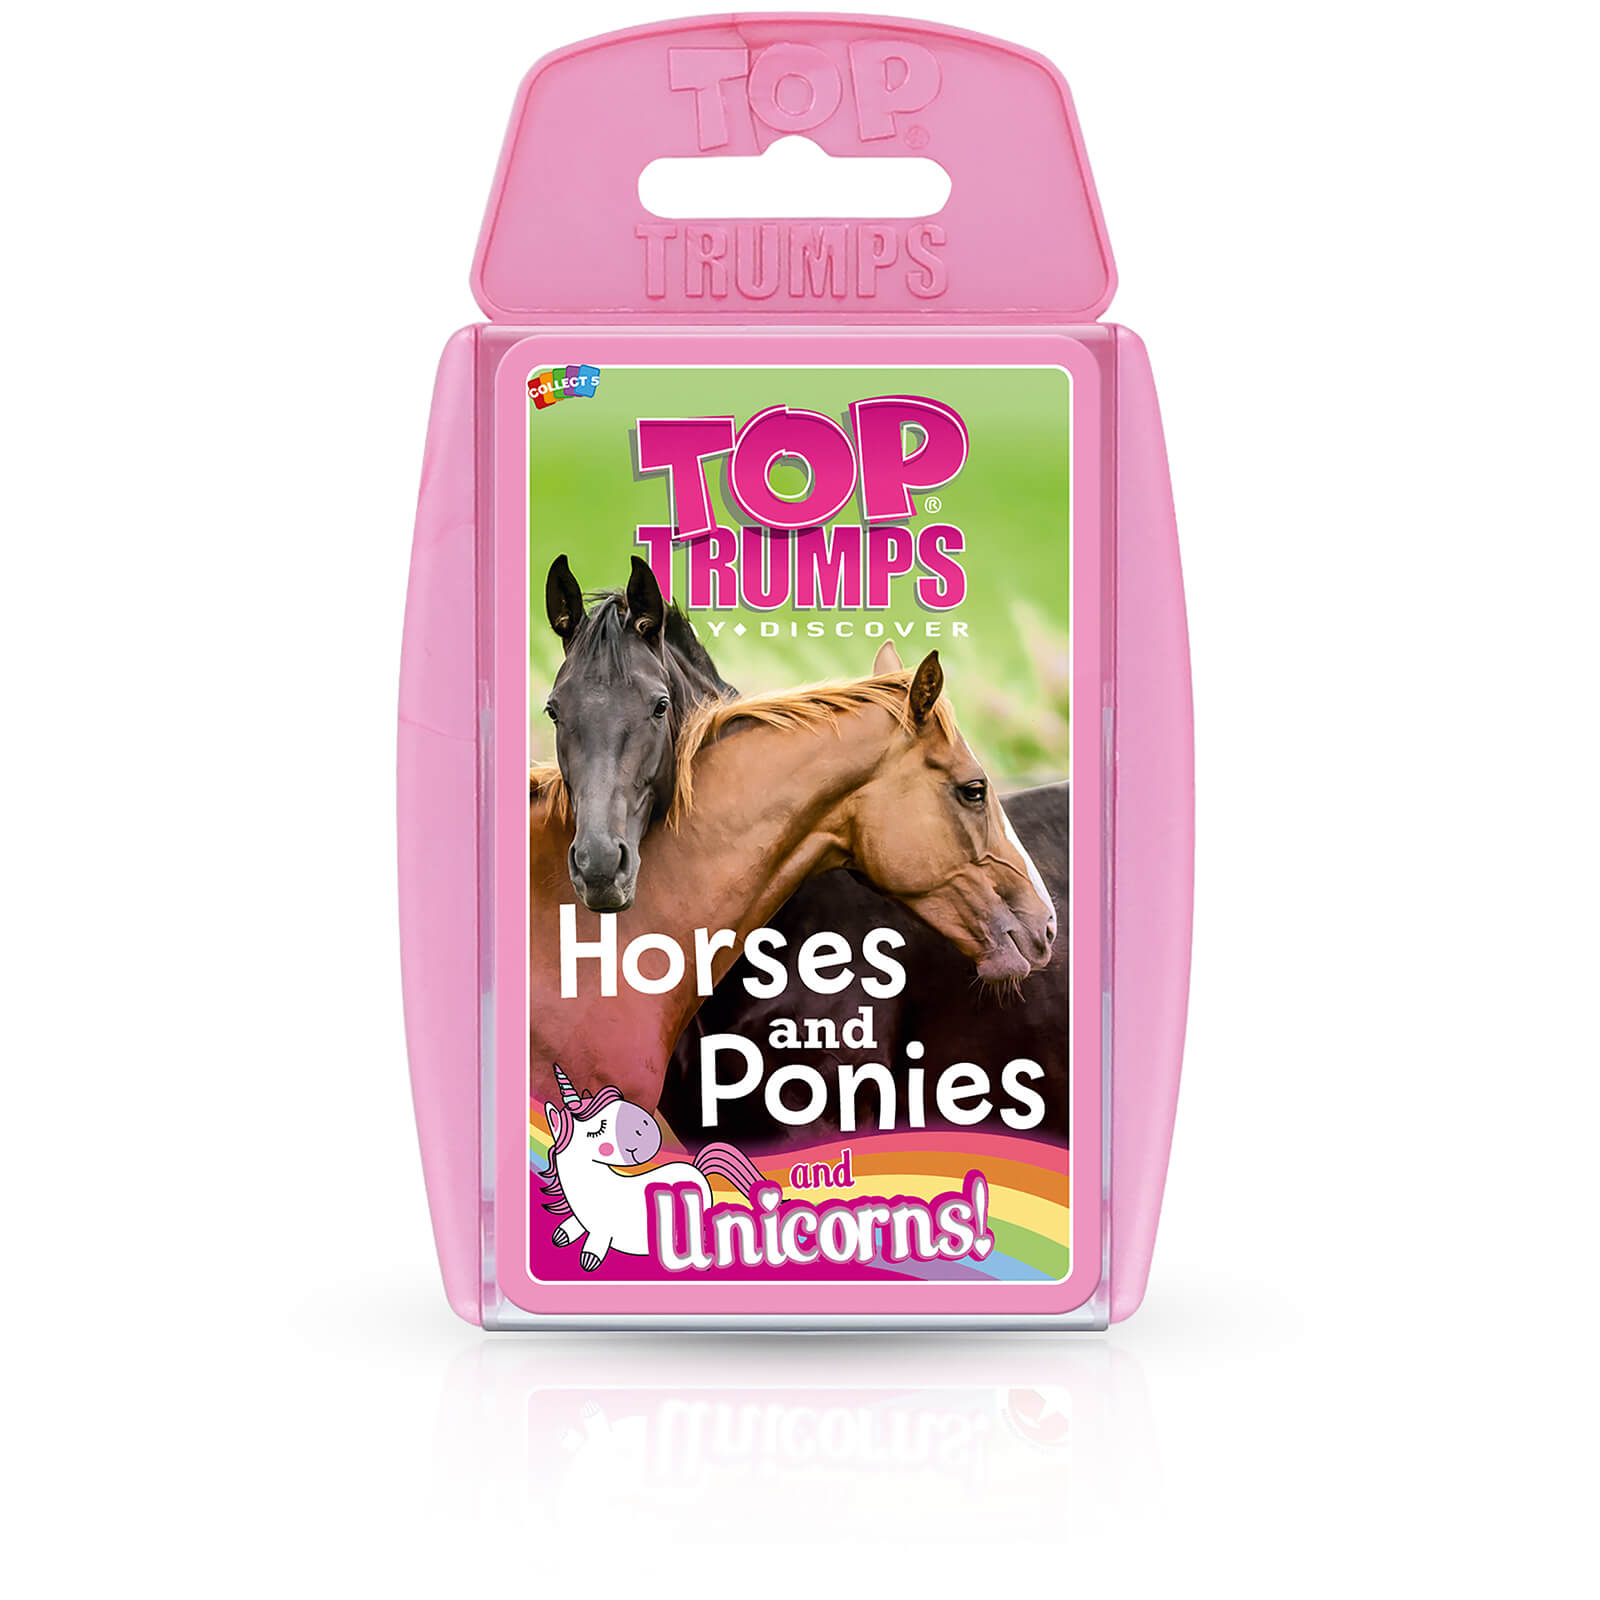 Top Trumps Card Game - Horses Ponies and Unicorns Edition